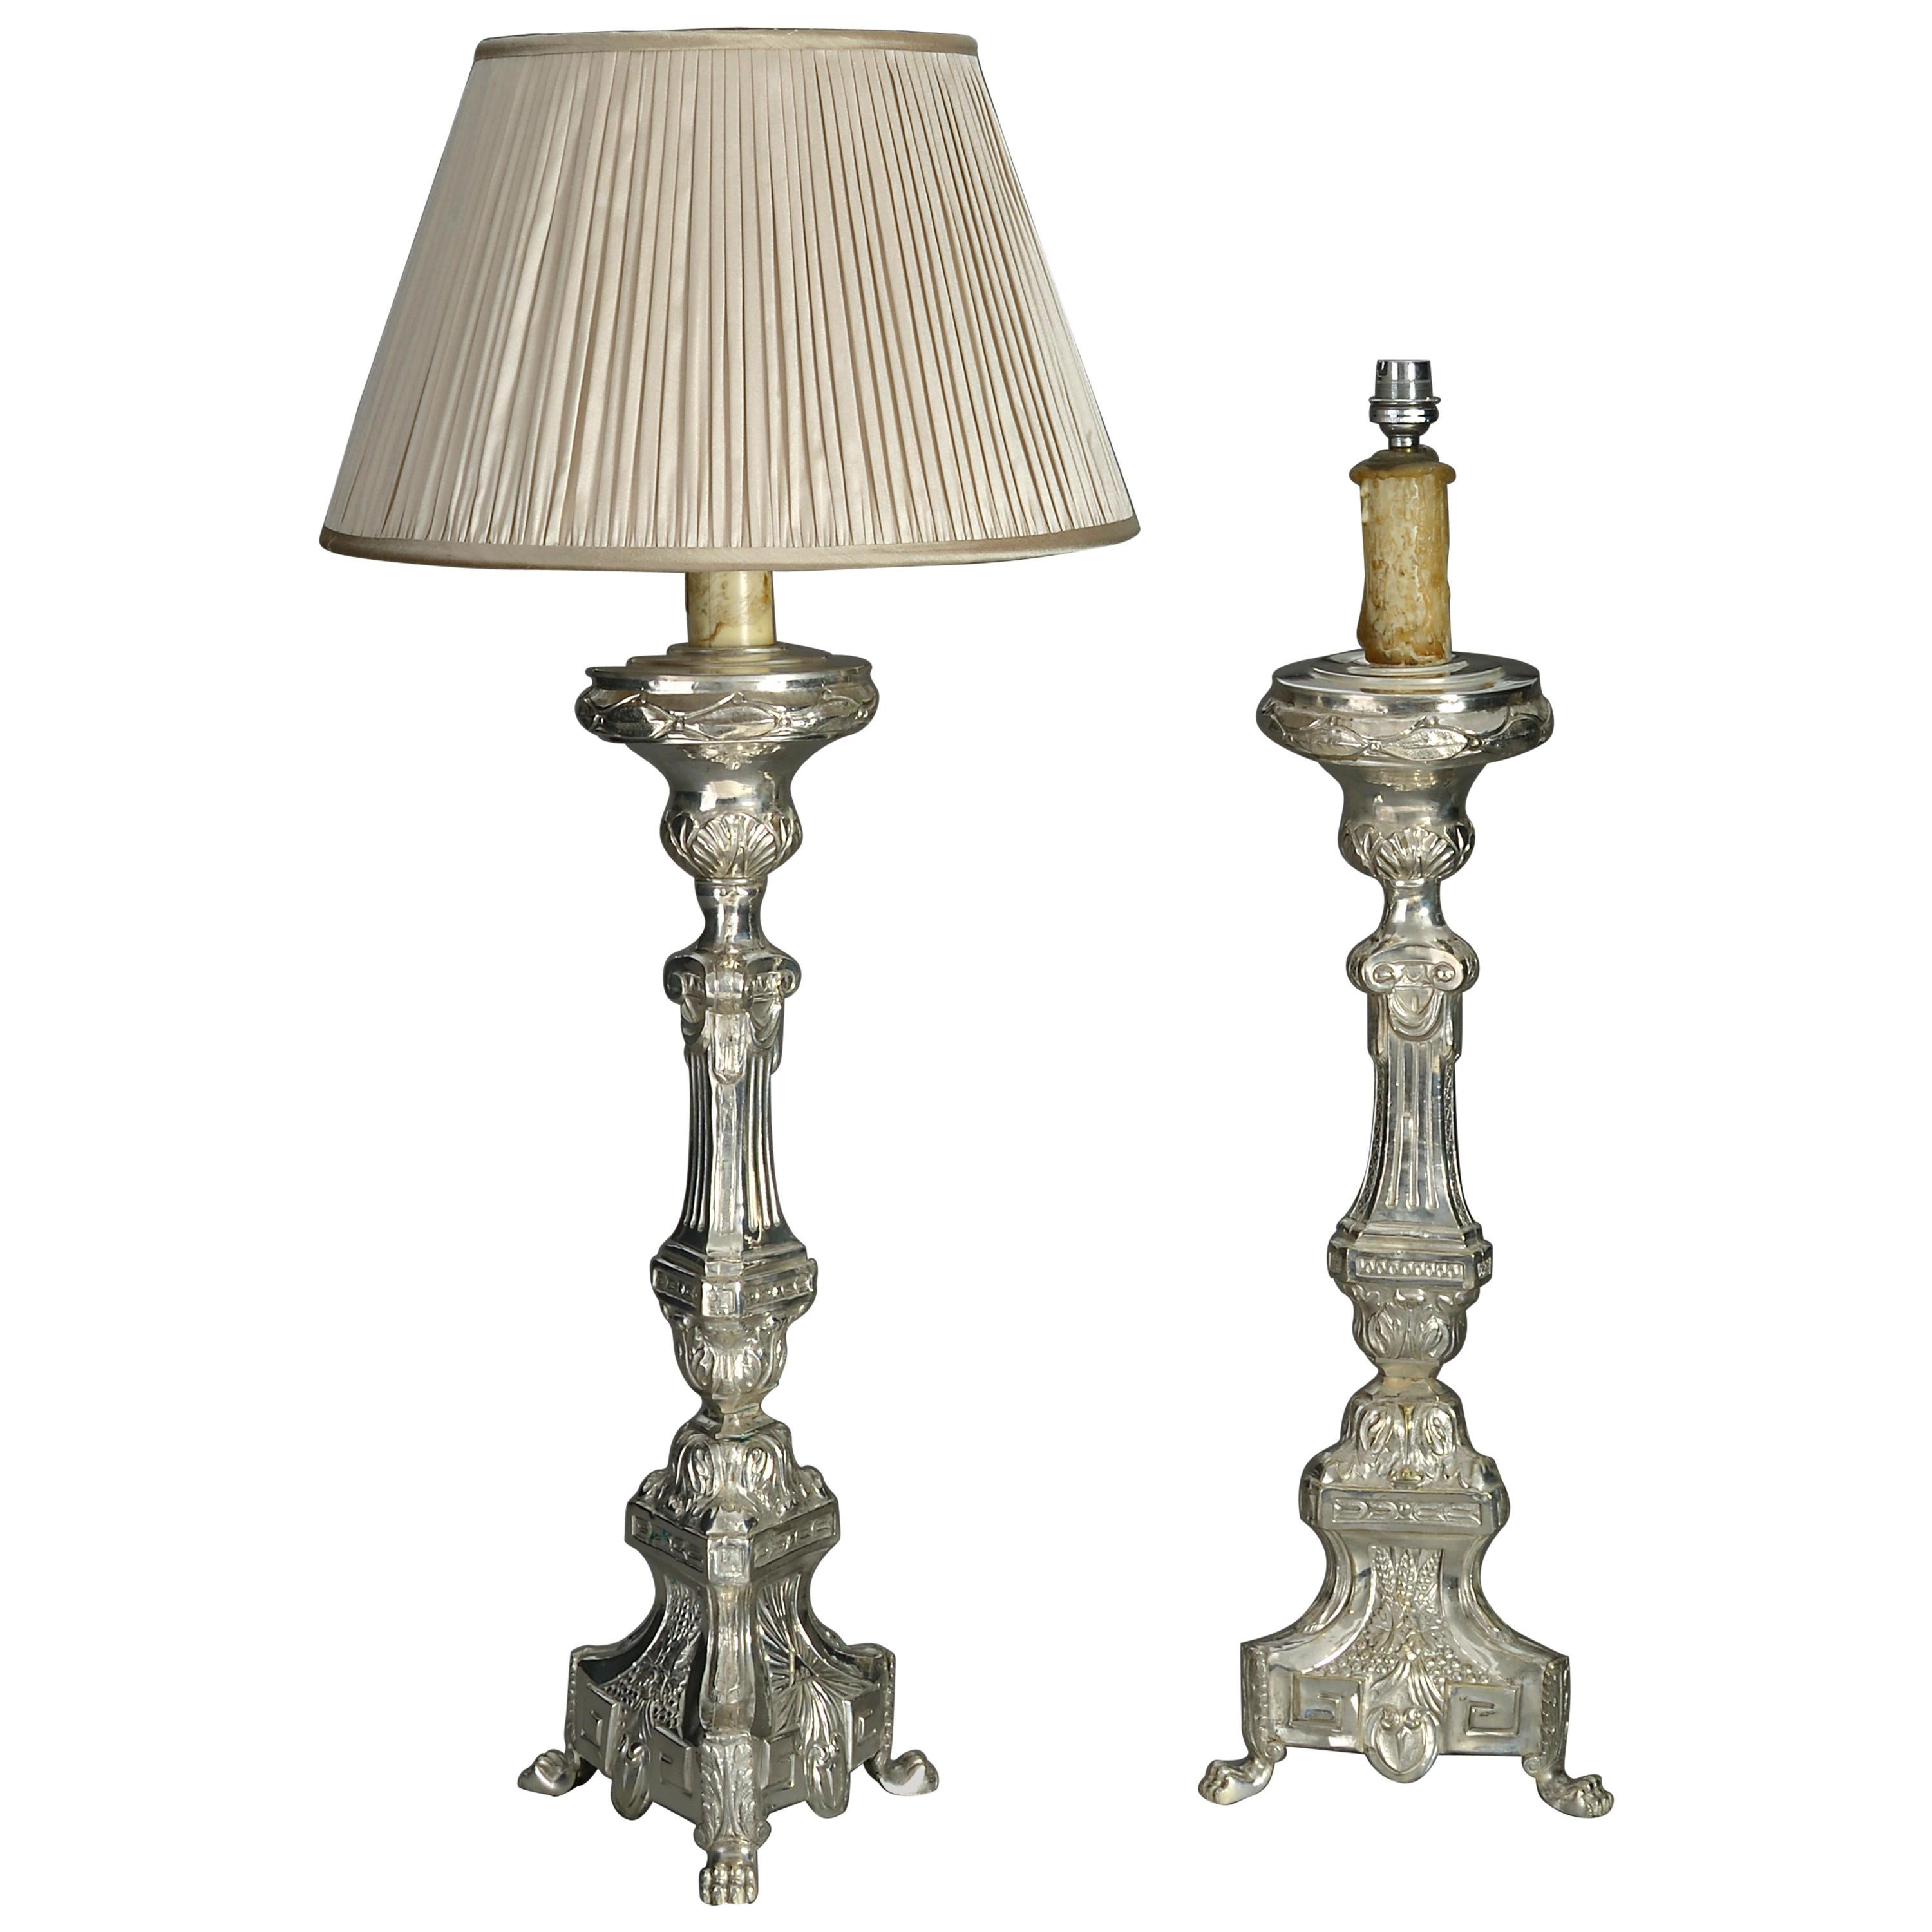 Pair of 19th Century Silvered Baroque Style Candlestick Lamps